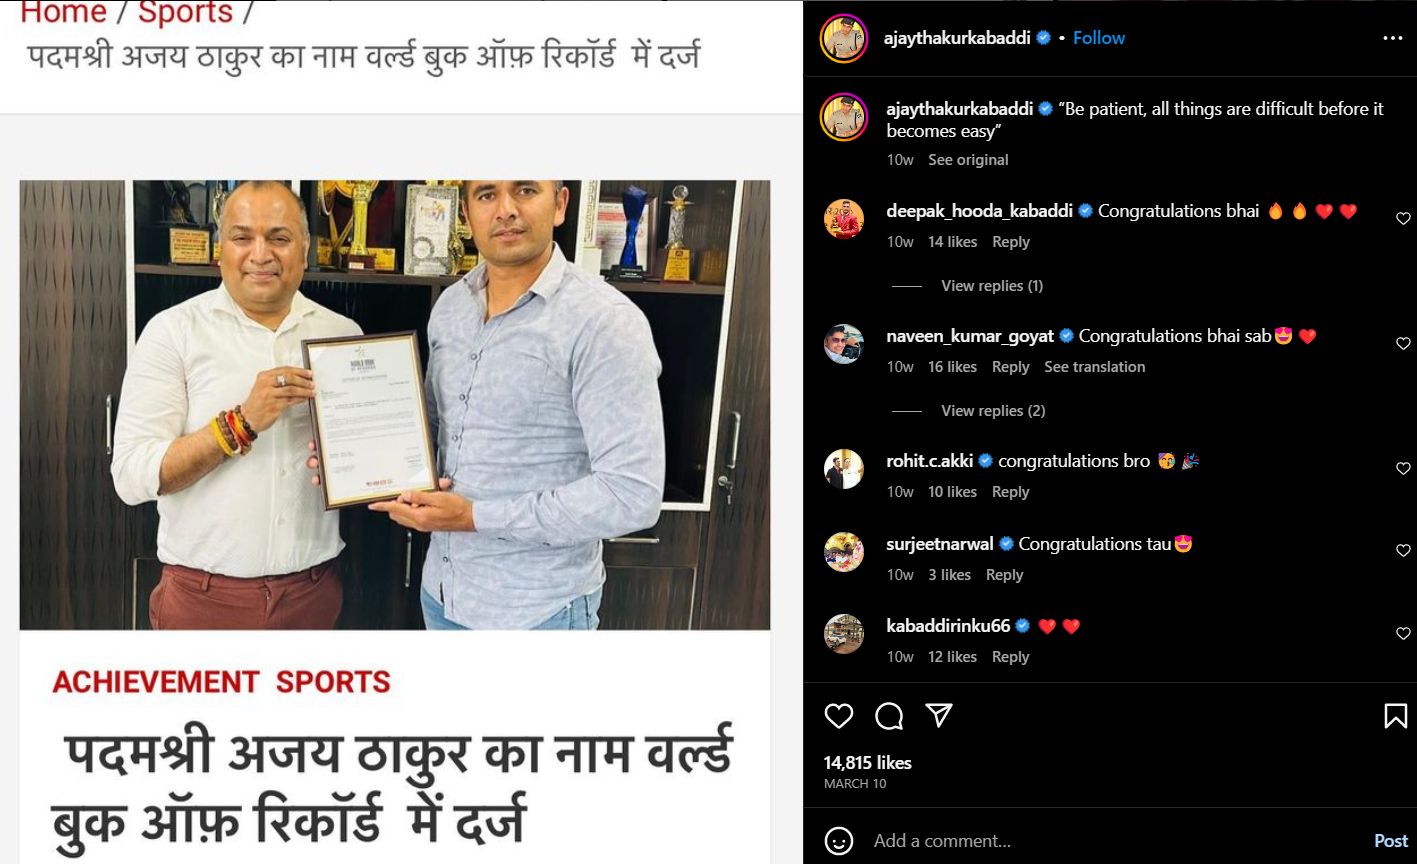 Ajay Thakur's post about winning World Record